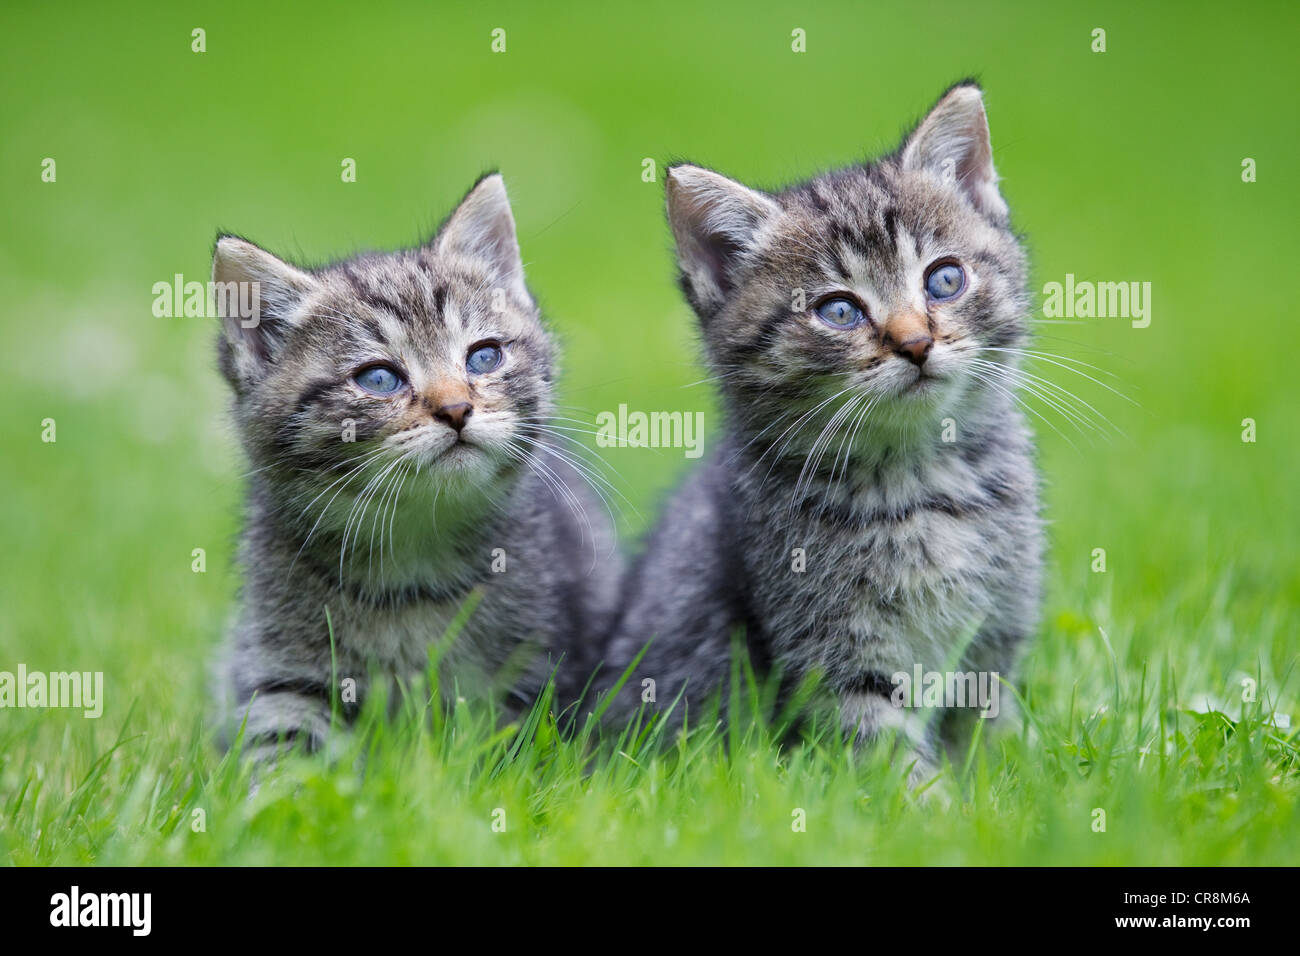 Two kittens on grass Stock Photo